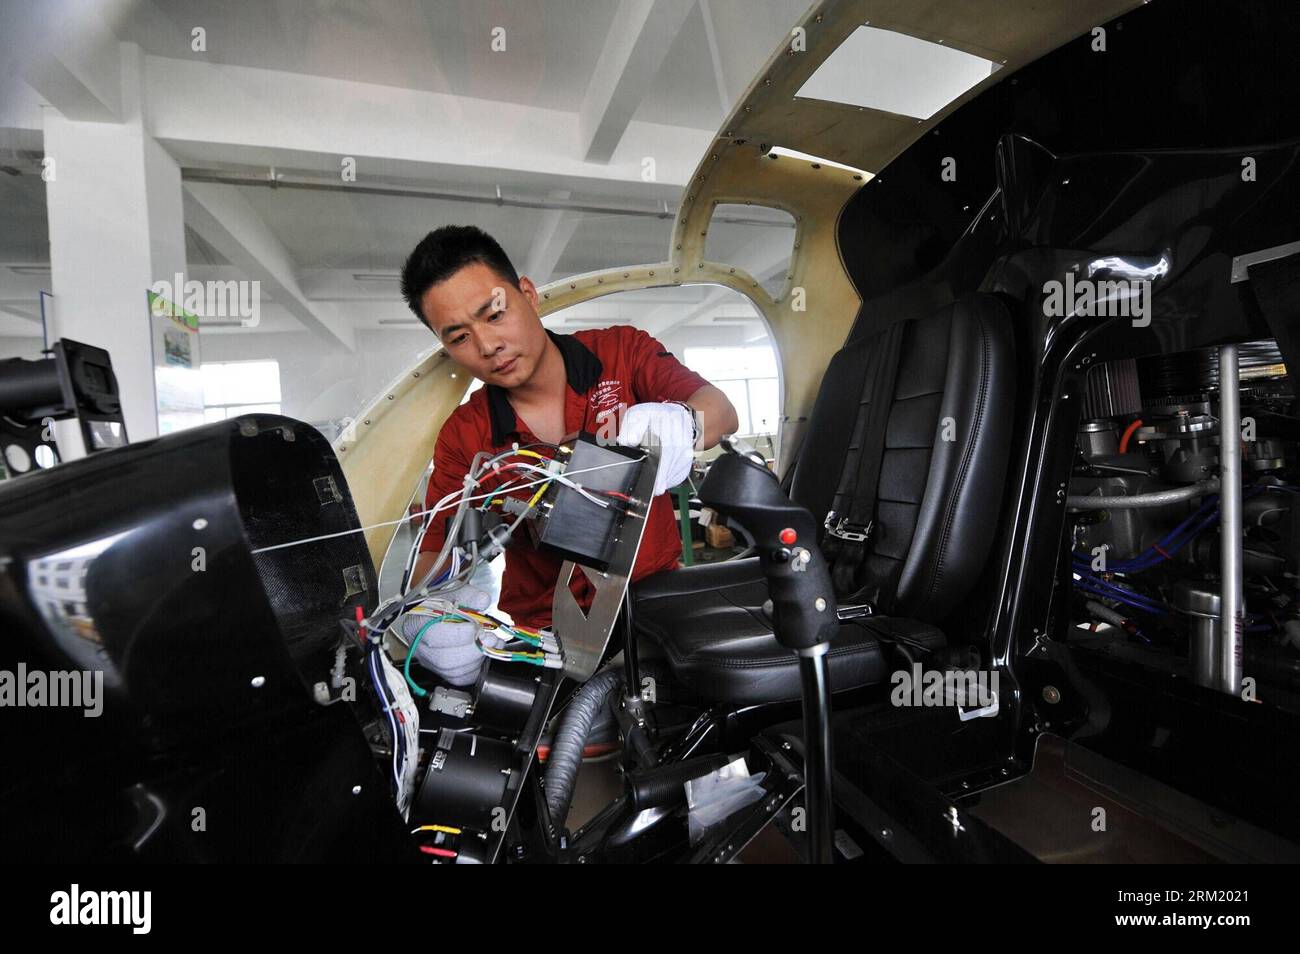 Bildnummer: 59656951  Datum: 15.05.2013  Copyright: imago/Xinhua  ZHUZHOU, May 15, 2013 -- A techinical worker assembles a RotorWay kit helicopter in RotorWay China Co., Ltd in Zhuzhou, central China s Hunan Province, May 15, 2013. The first batch of RotorWay A600 kit helicopeters assembled in China have passed acceptance check. With a full tank of 64 liters of 97 gasoline, a China-assembled A600 helicopeter, priced 1.18 million yuan (192,104 US dollars), has an endurance of two hours. (Xinhua/Long Hongtao) (lfj) CHINA-HUNAN-ROTORWAY HELICOPTER-ASSEMBLING (CN) PUBLICATIONxNOTxINxCHN xcb x0x 20 Stock Photo